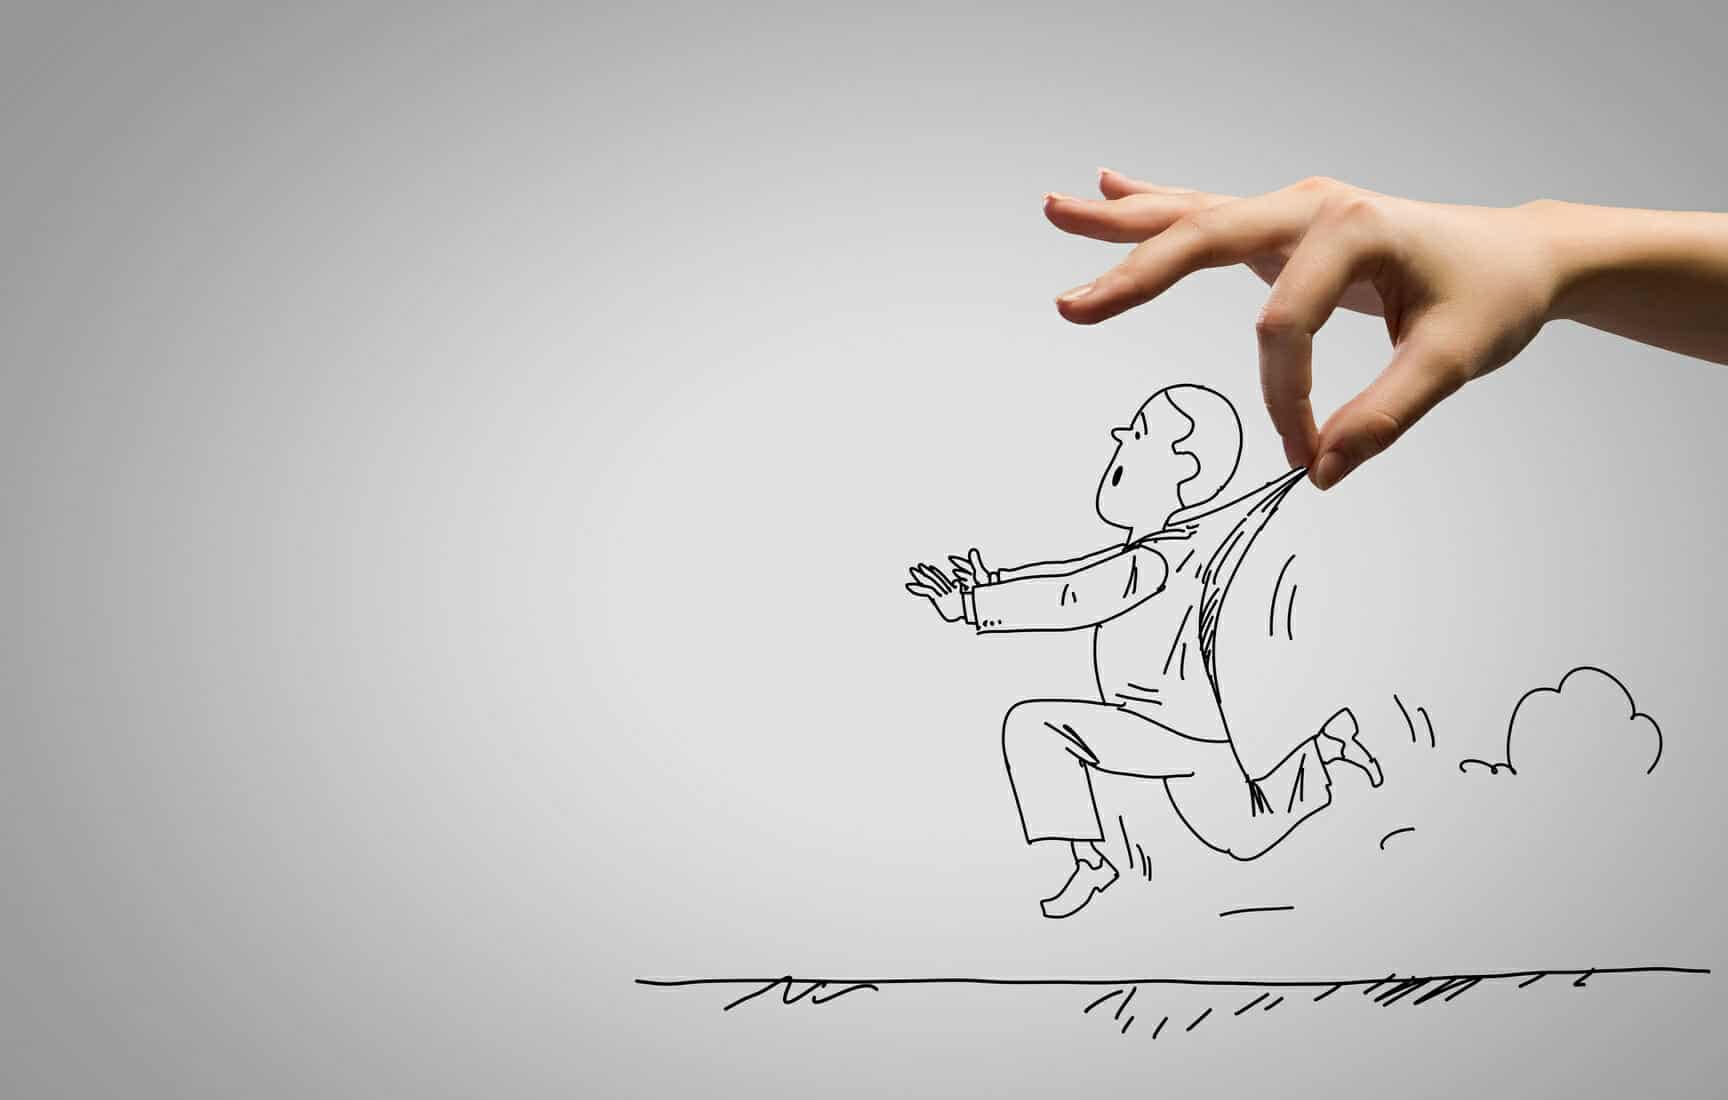 Hand holding a cartoon drawing of a man trying to run away.